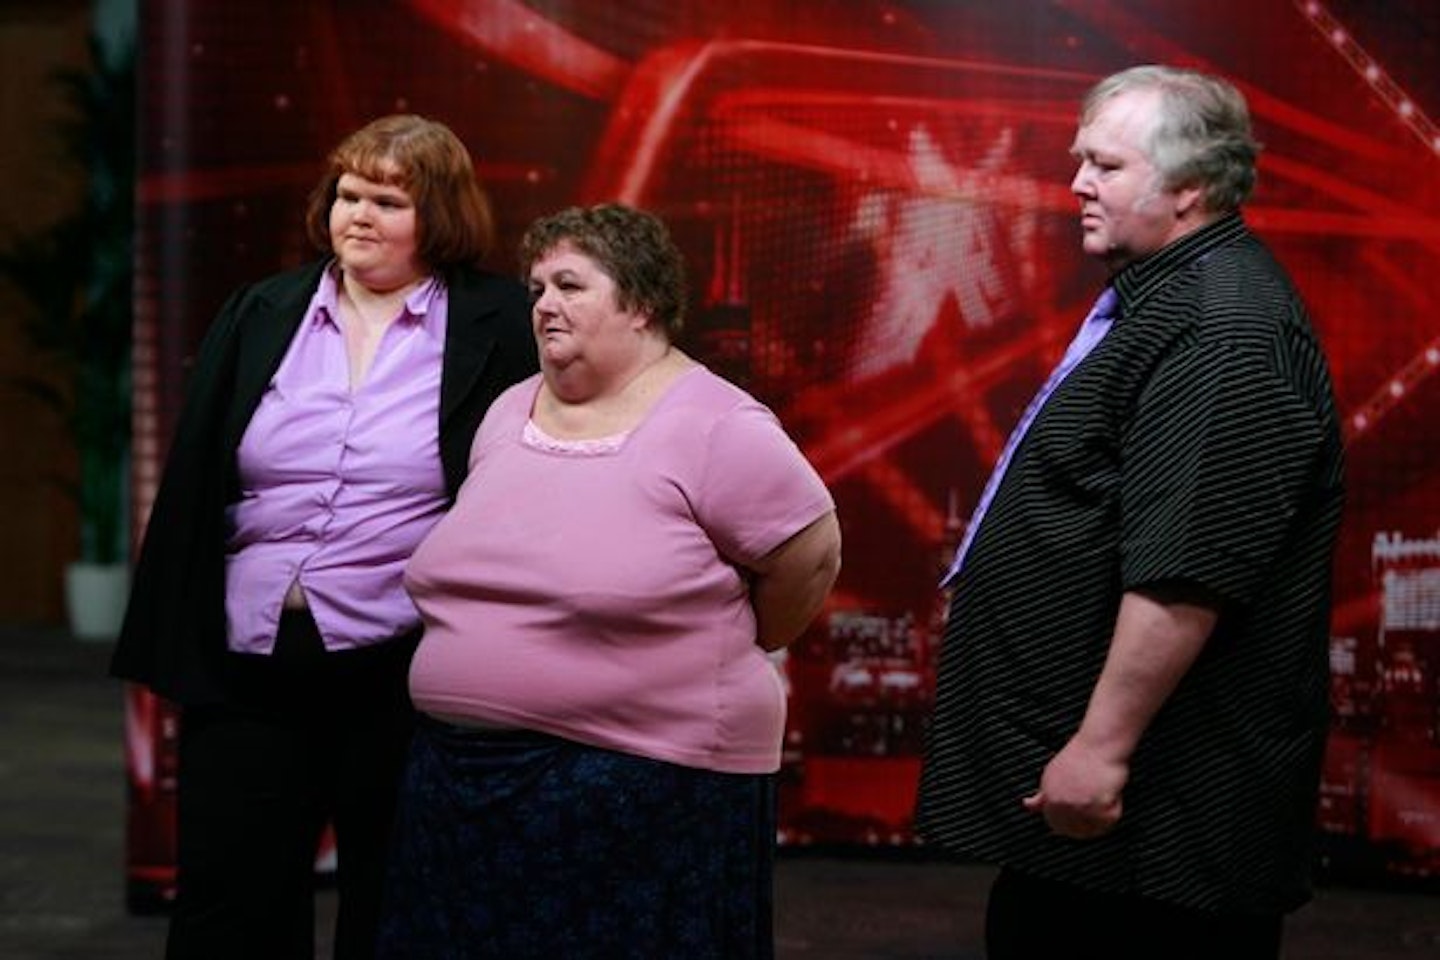 The Chawner family appear on The X Factor / ITV